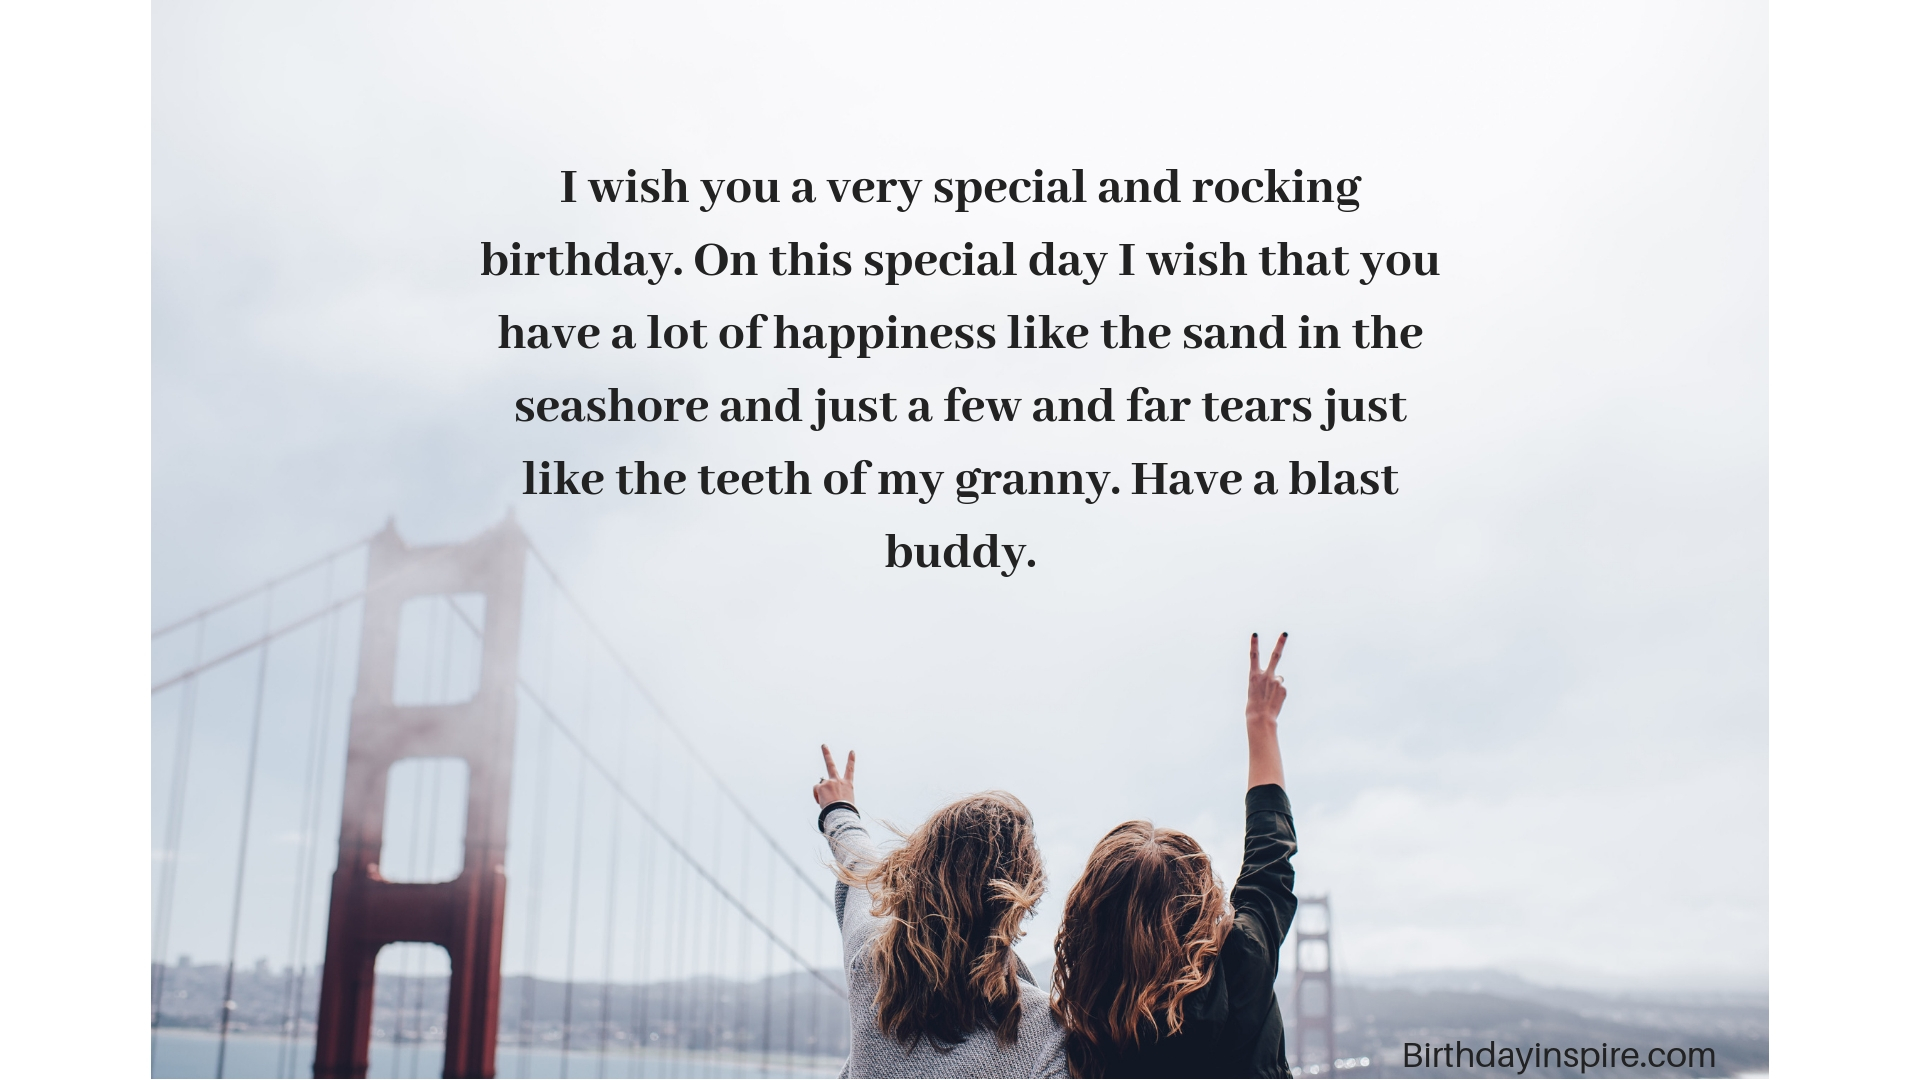 birthday wishes for 55 year old best friend